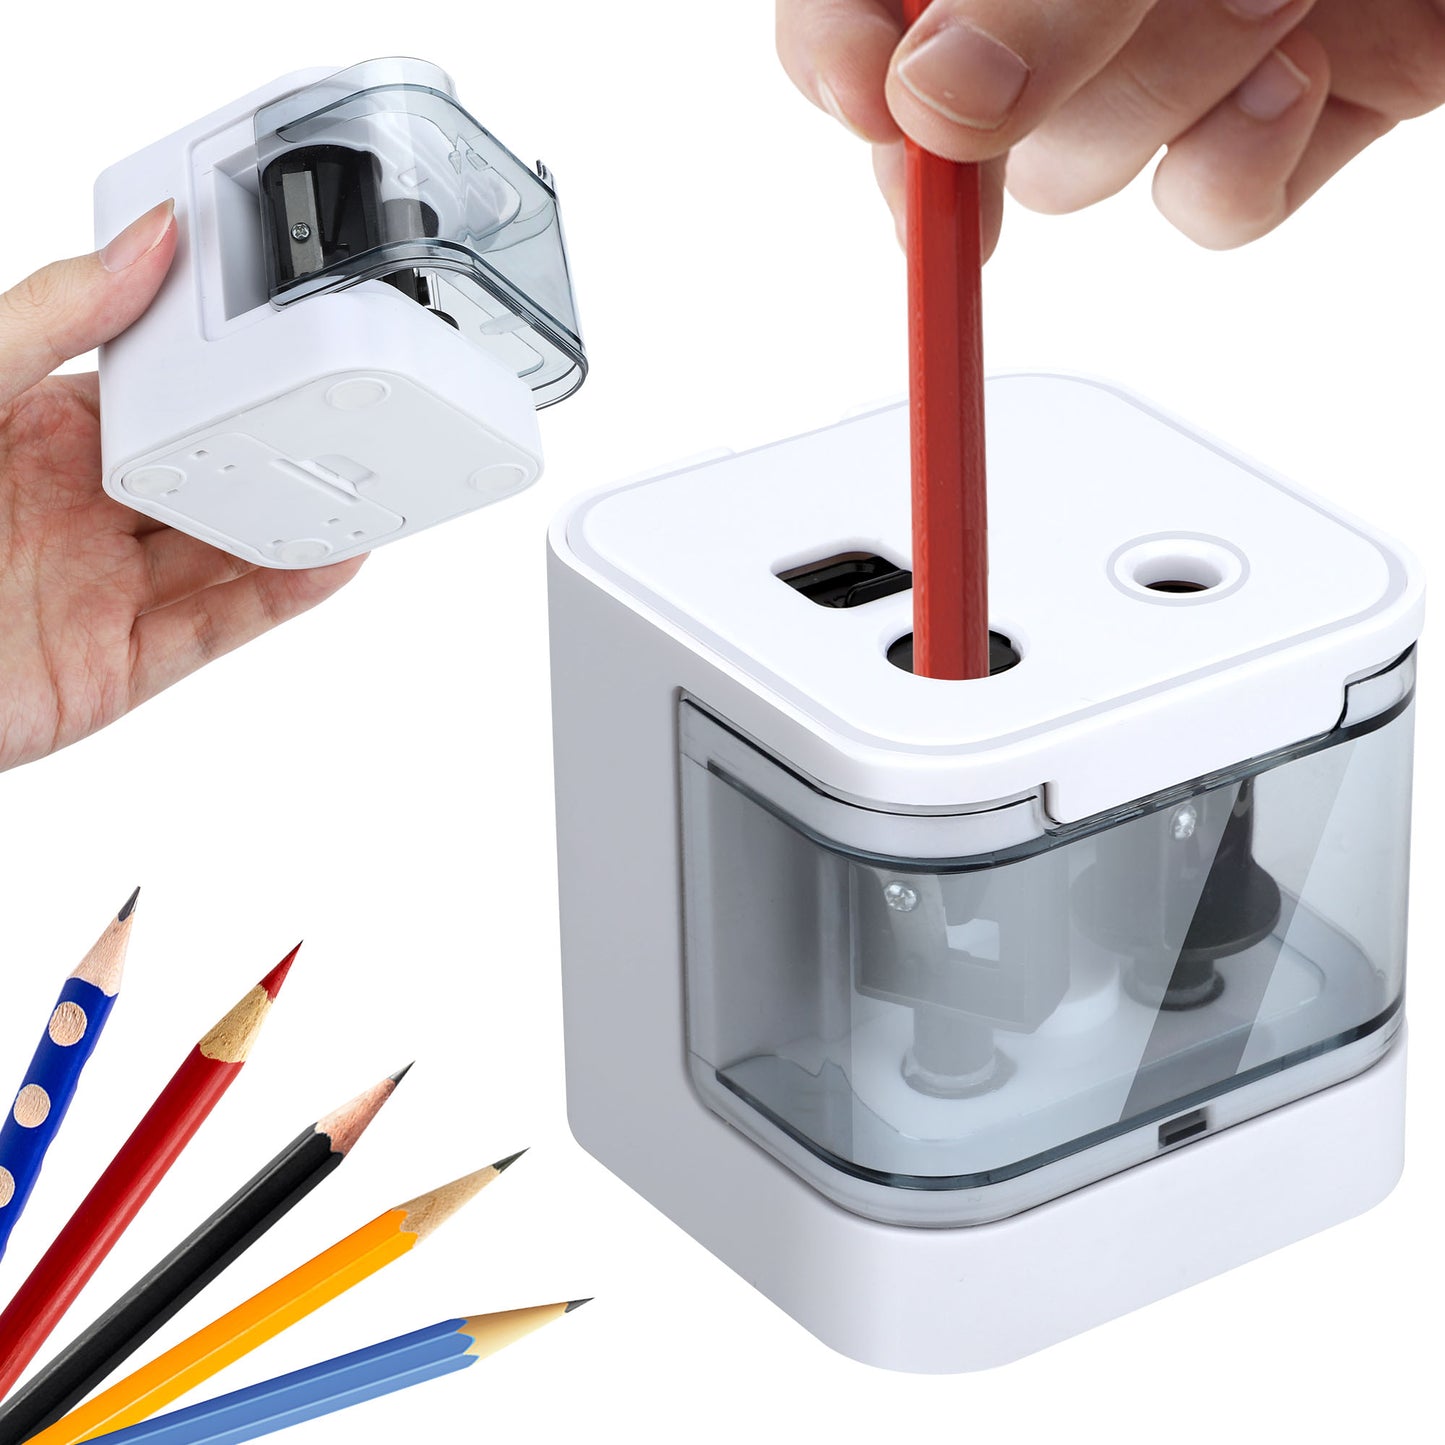 Electric Pencil Sharpener - Battery-Operated, Dual Hole Design